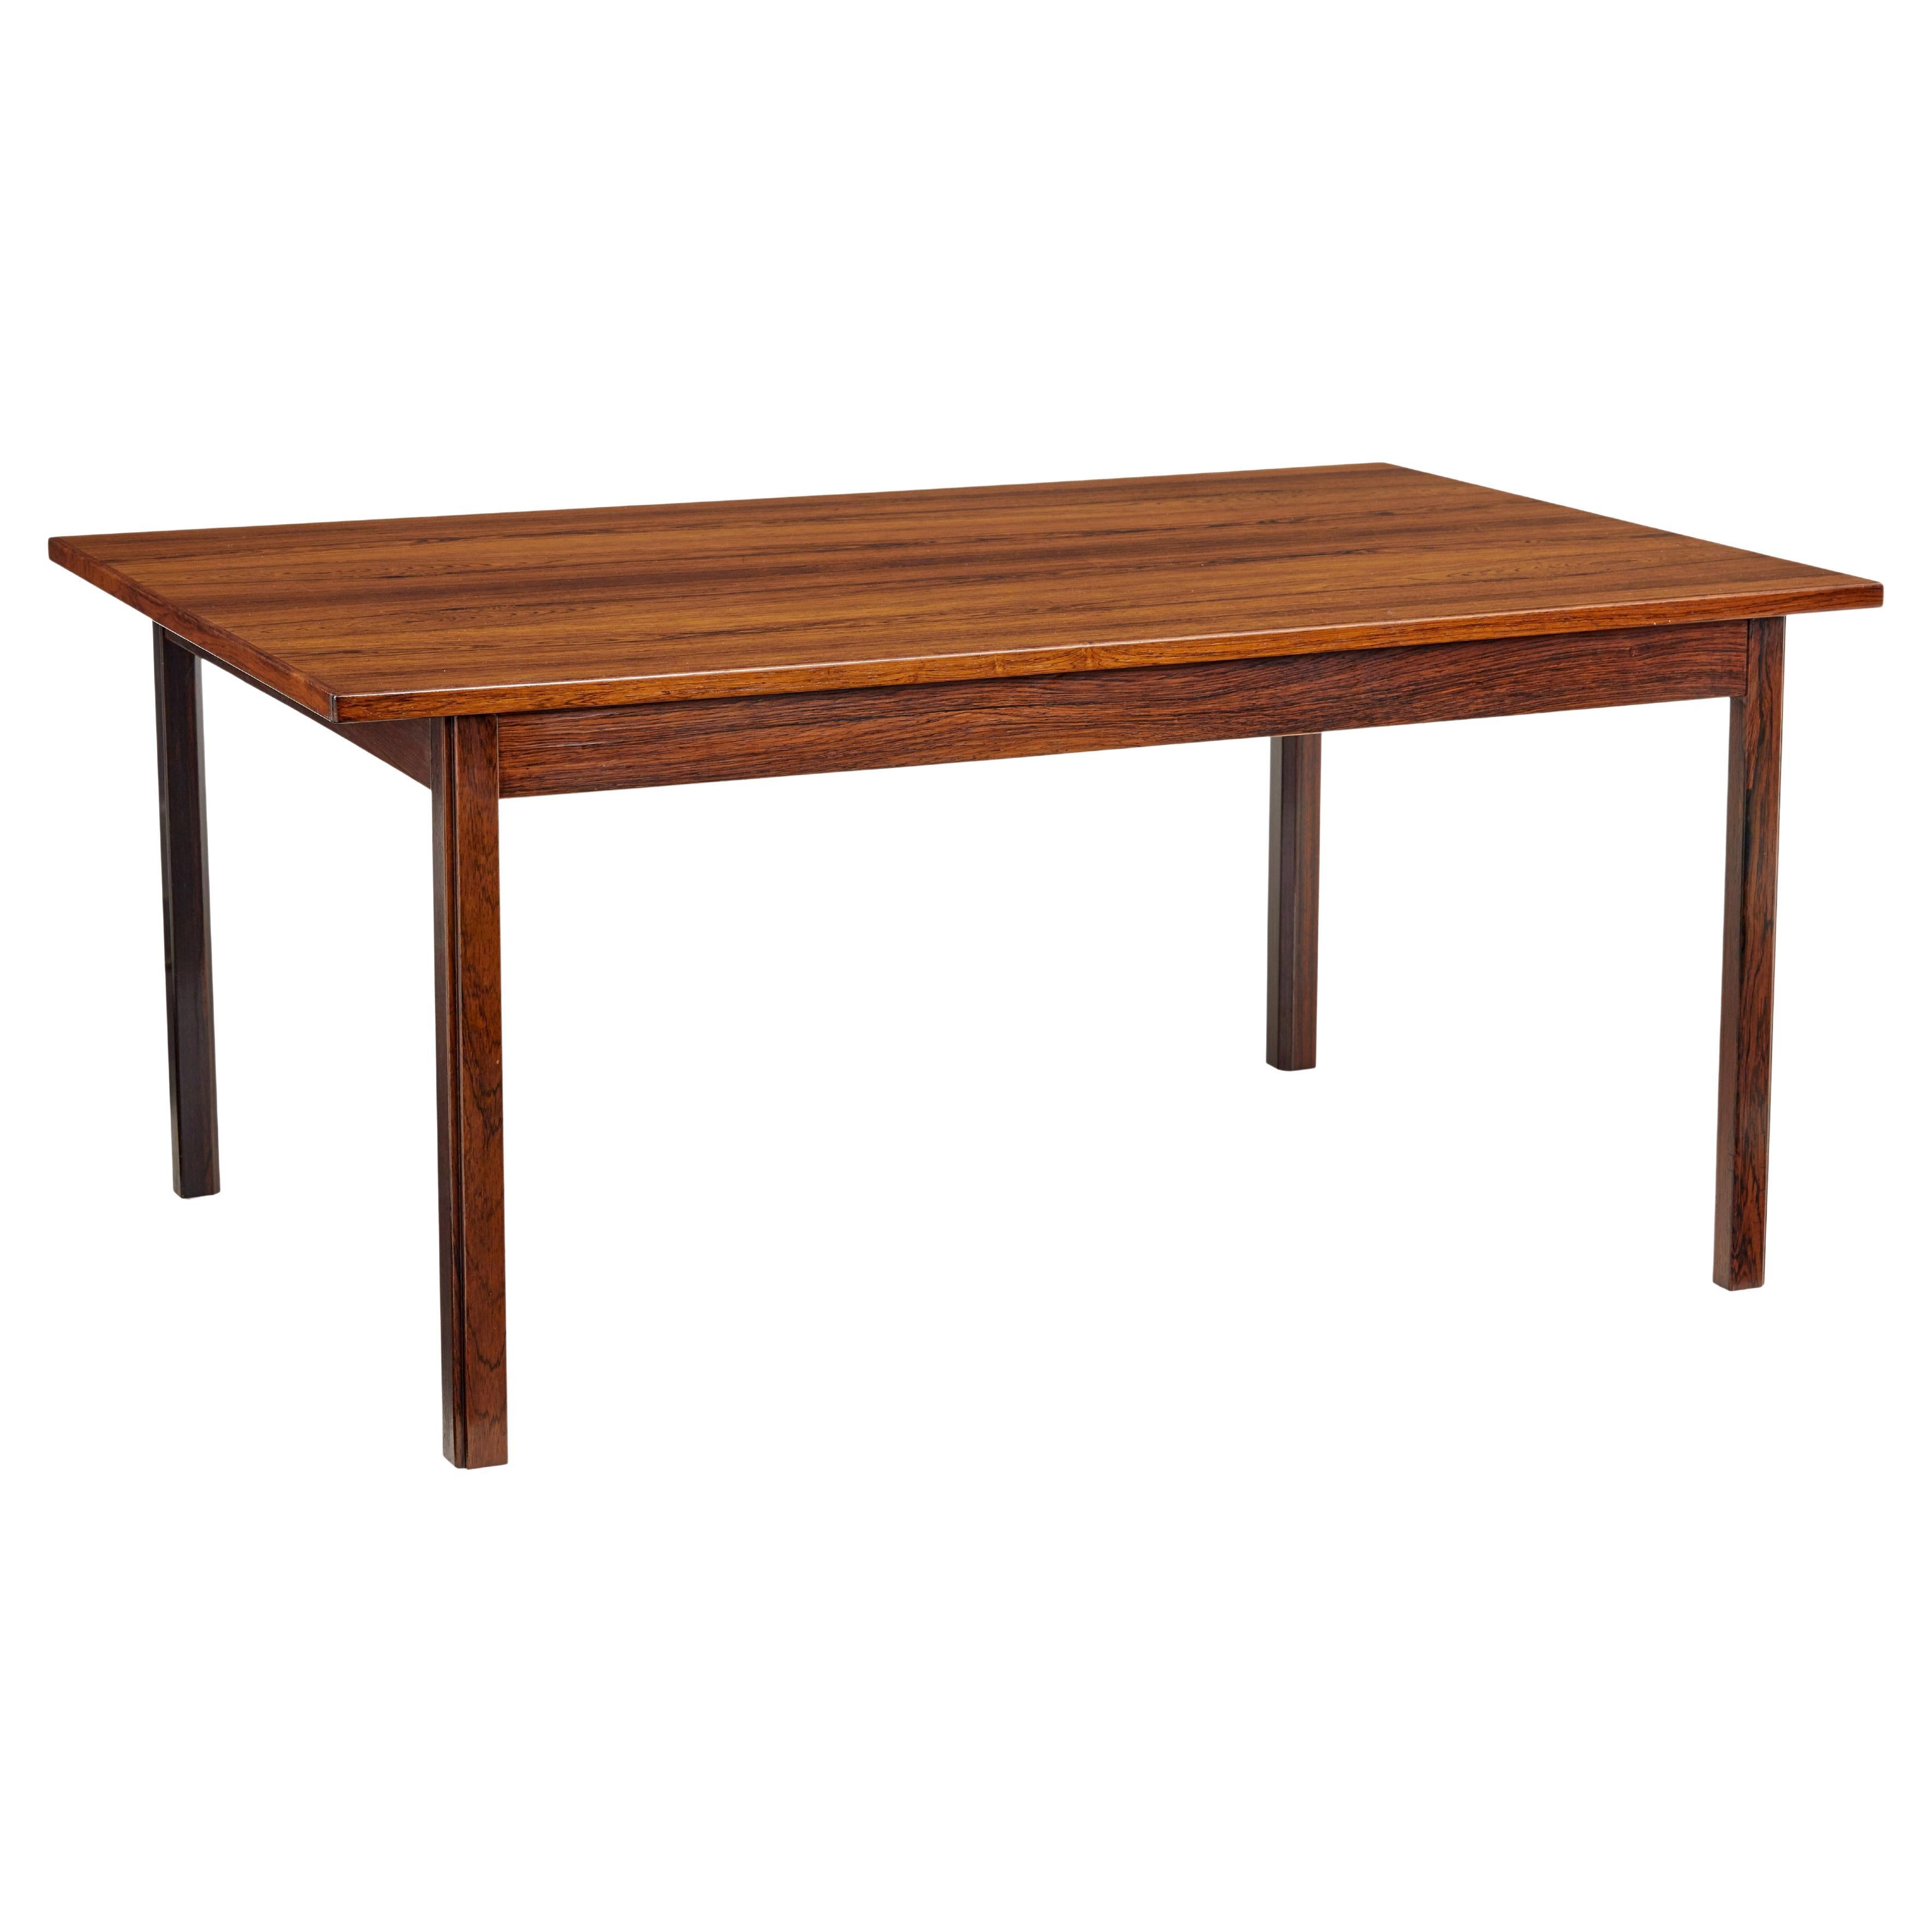 Mid-20th Century Scandinavian Coffee Table For Sale